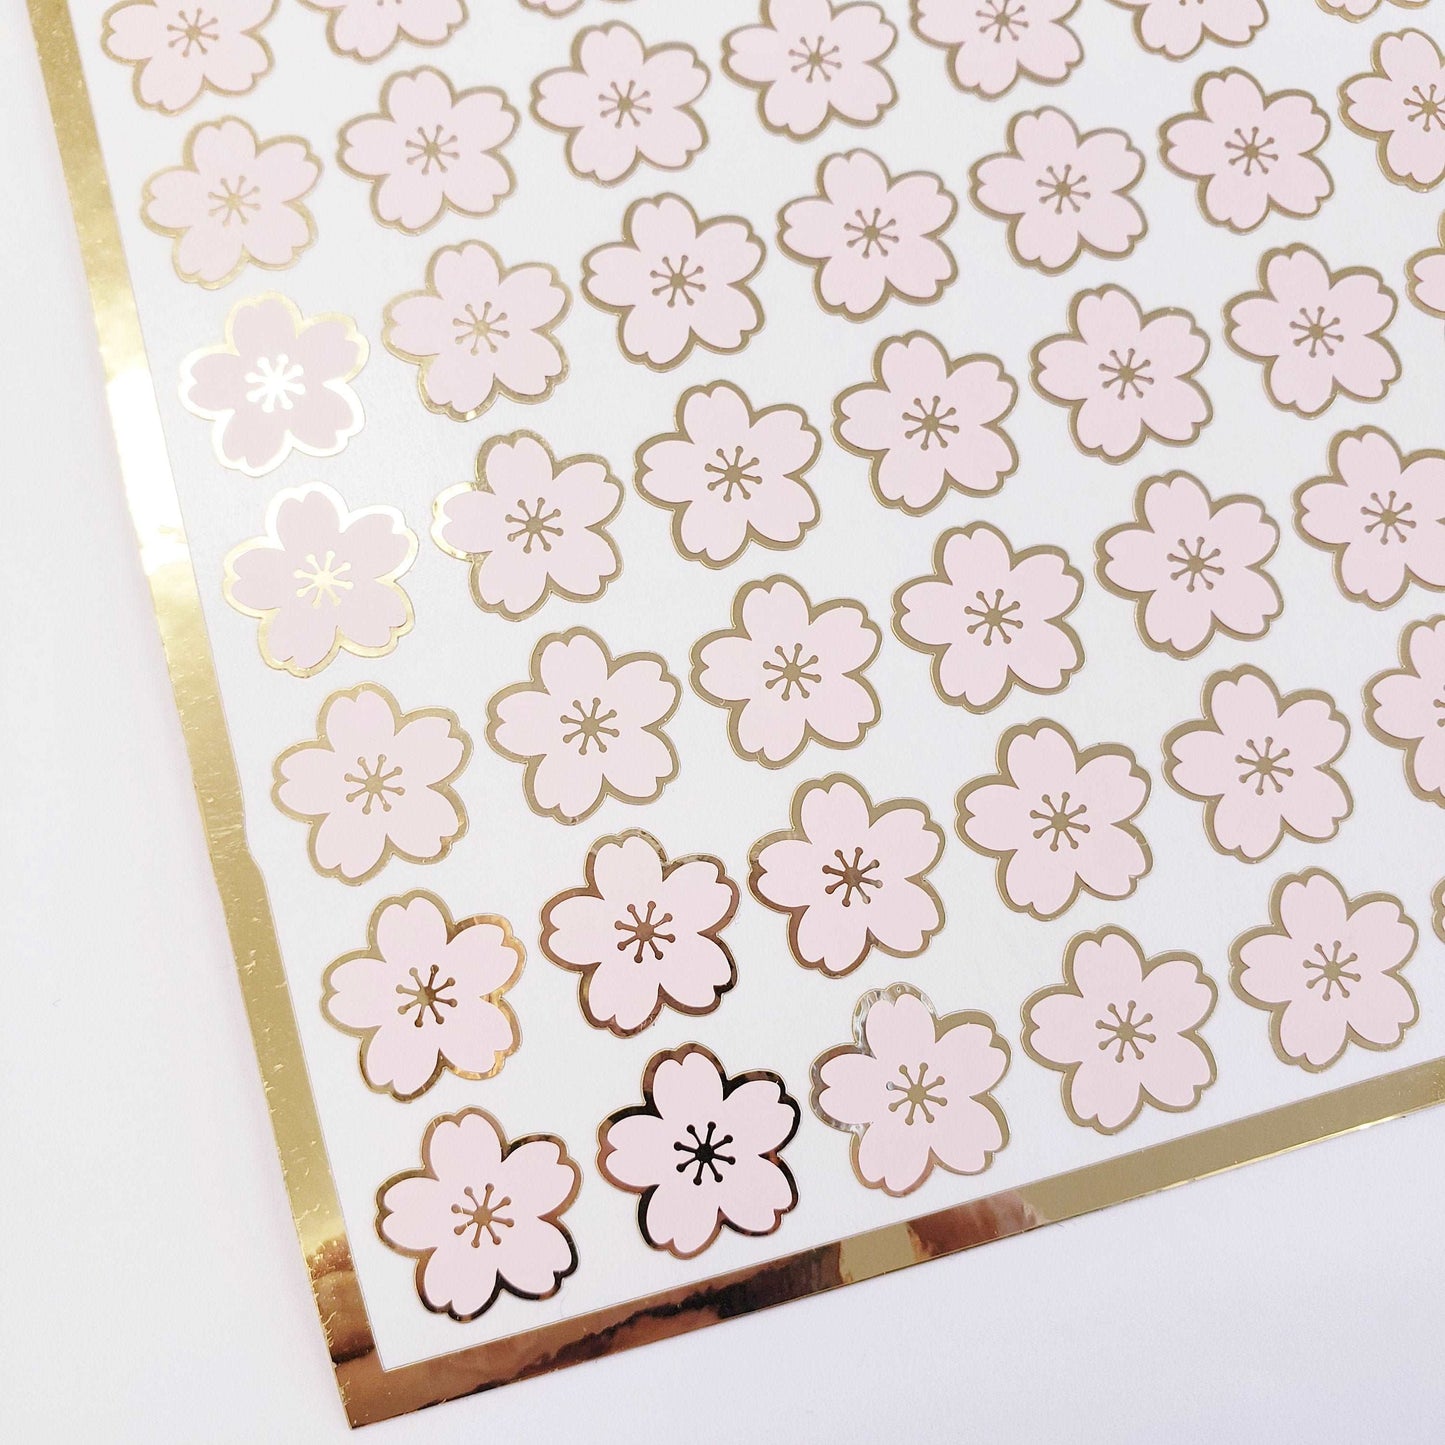 Pink Cherry Blossom Flower Stickers, set of 70 pale pink and gold Sakura flowers stickers for spring weddings, small one half inch flowers.